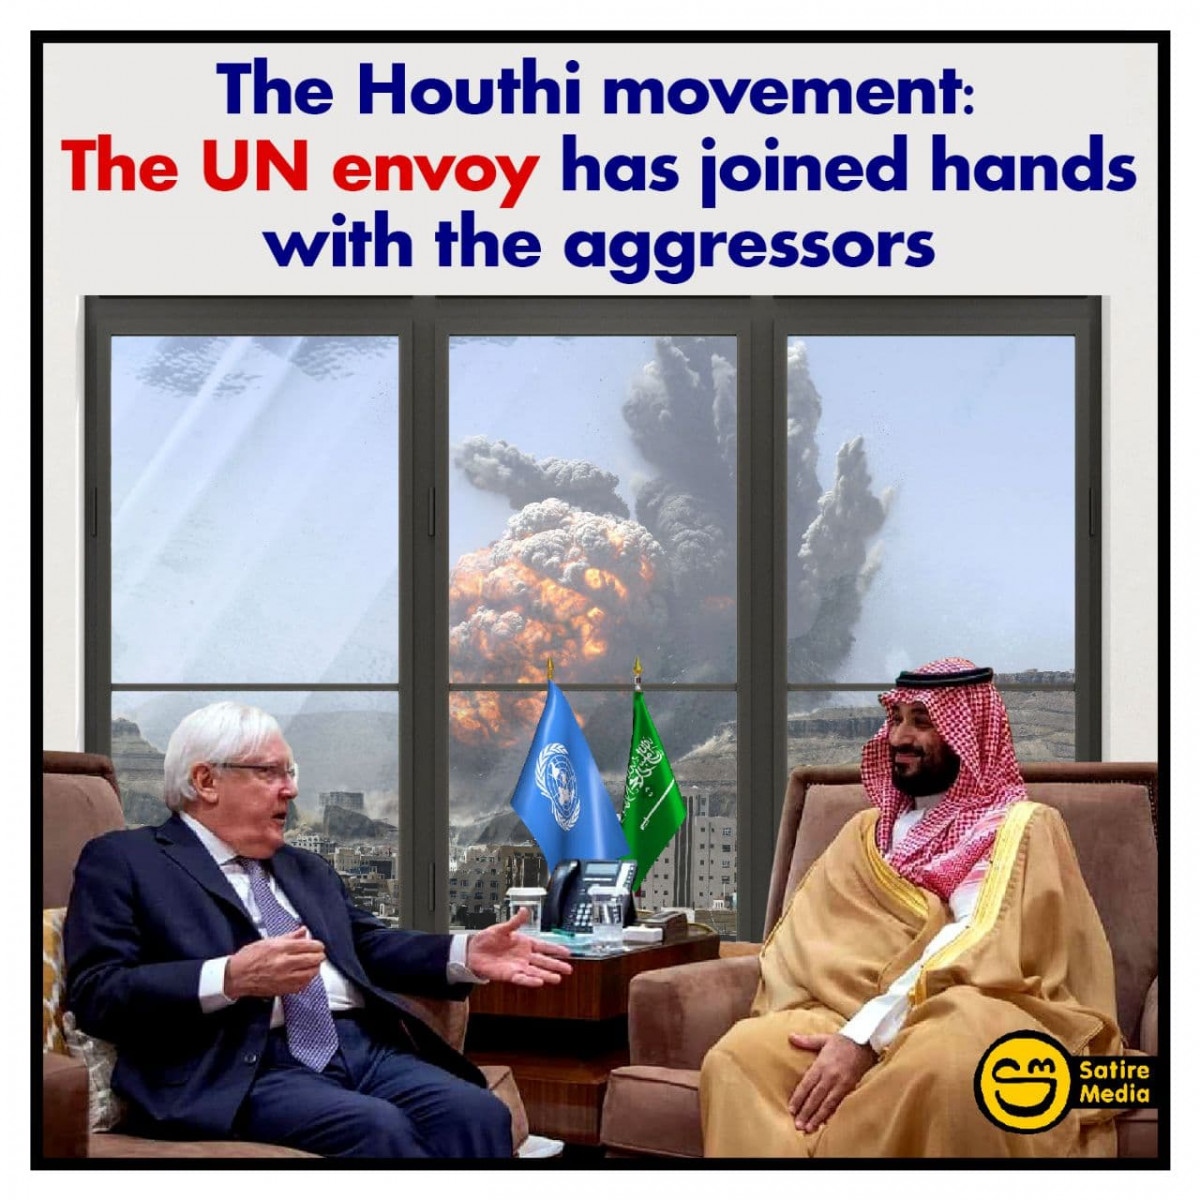 The Houthi movement: The UN envoy has joined hands with the aggressors